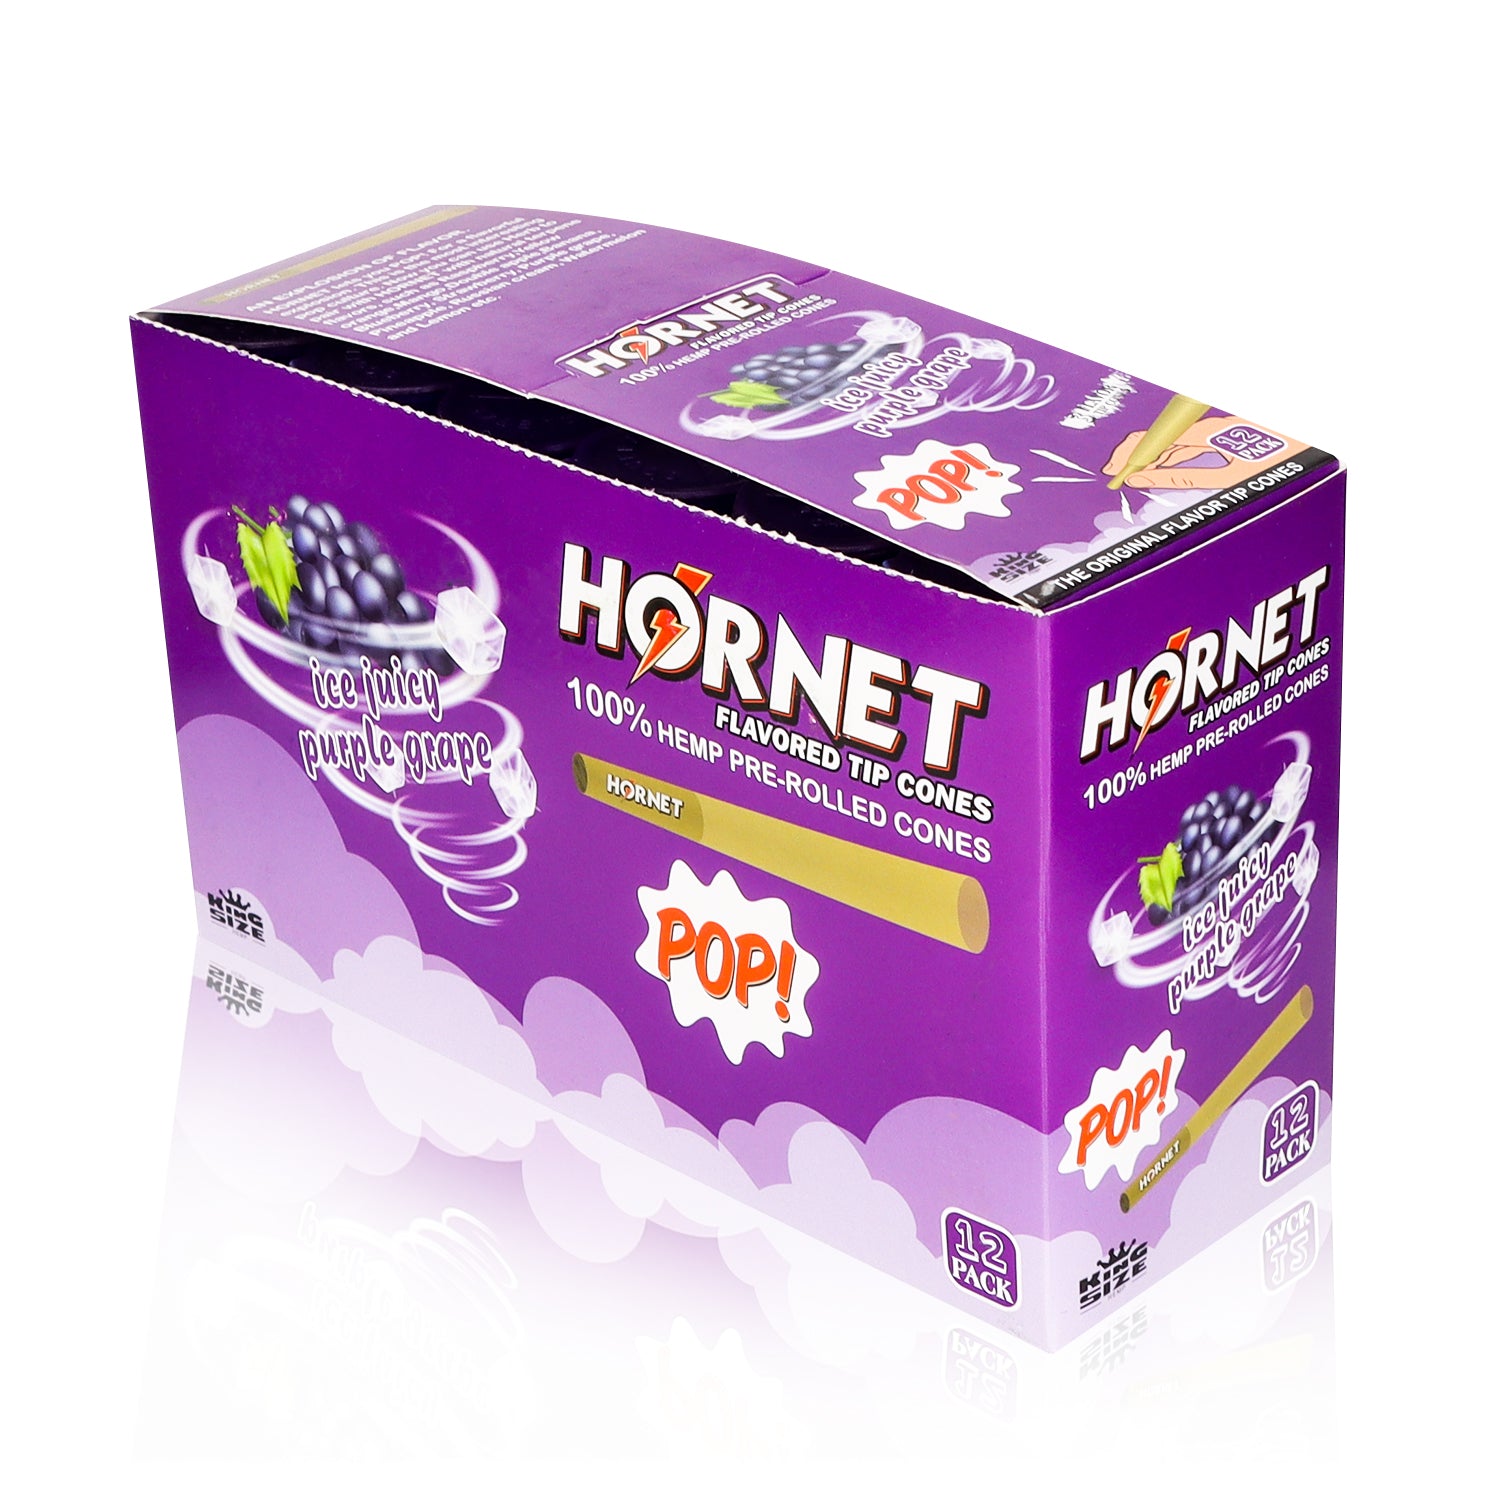 HORNET Grape Flavors Pre Rolled Cones, King Size Pre Rolled Rolling Paper With Tips, Slow Burning Rolling Cones & Flavored Pop, 3 PCS / Tube, 12 Tubes / Box